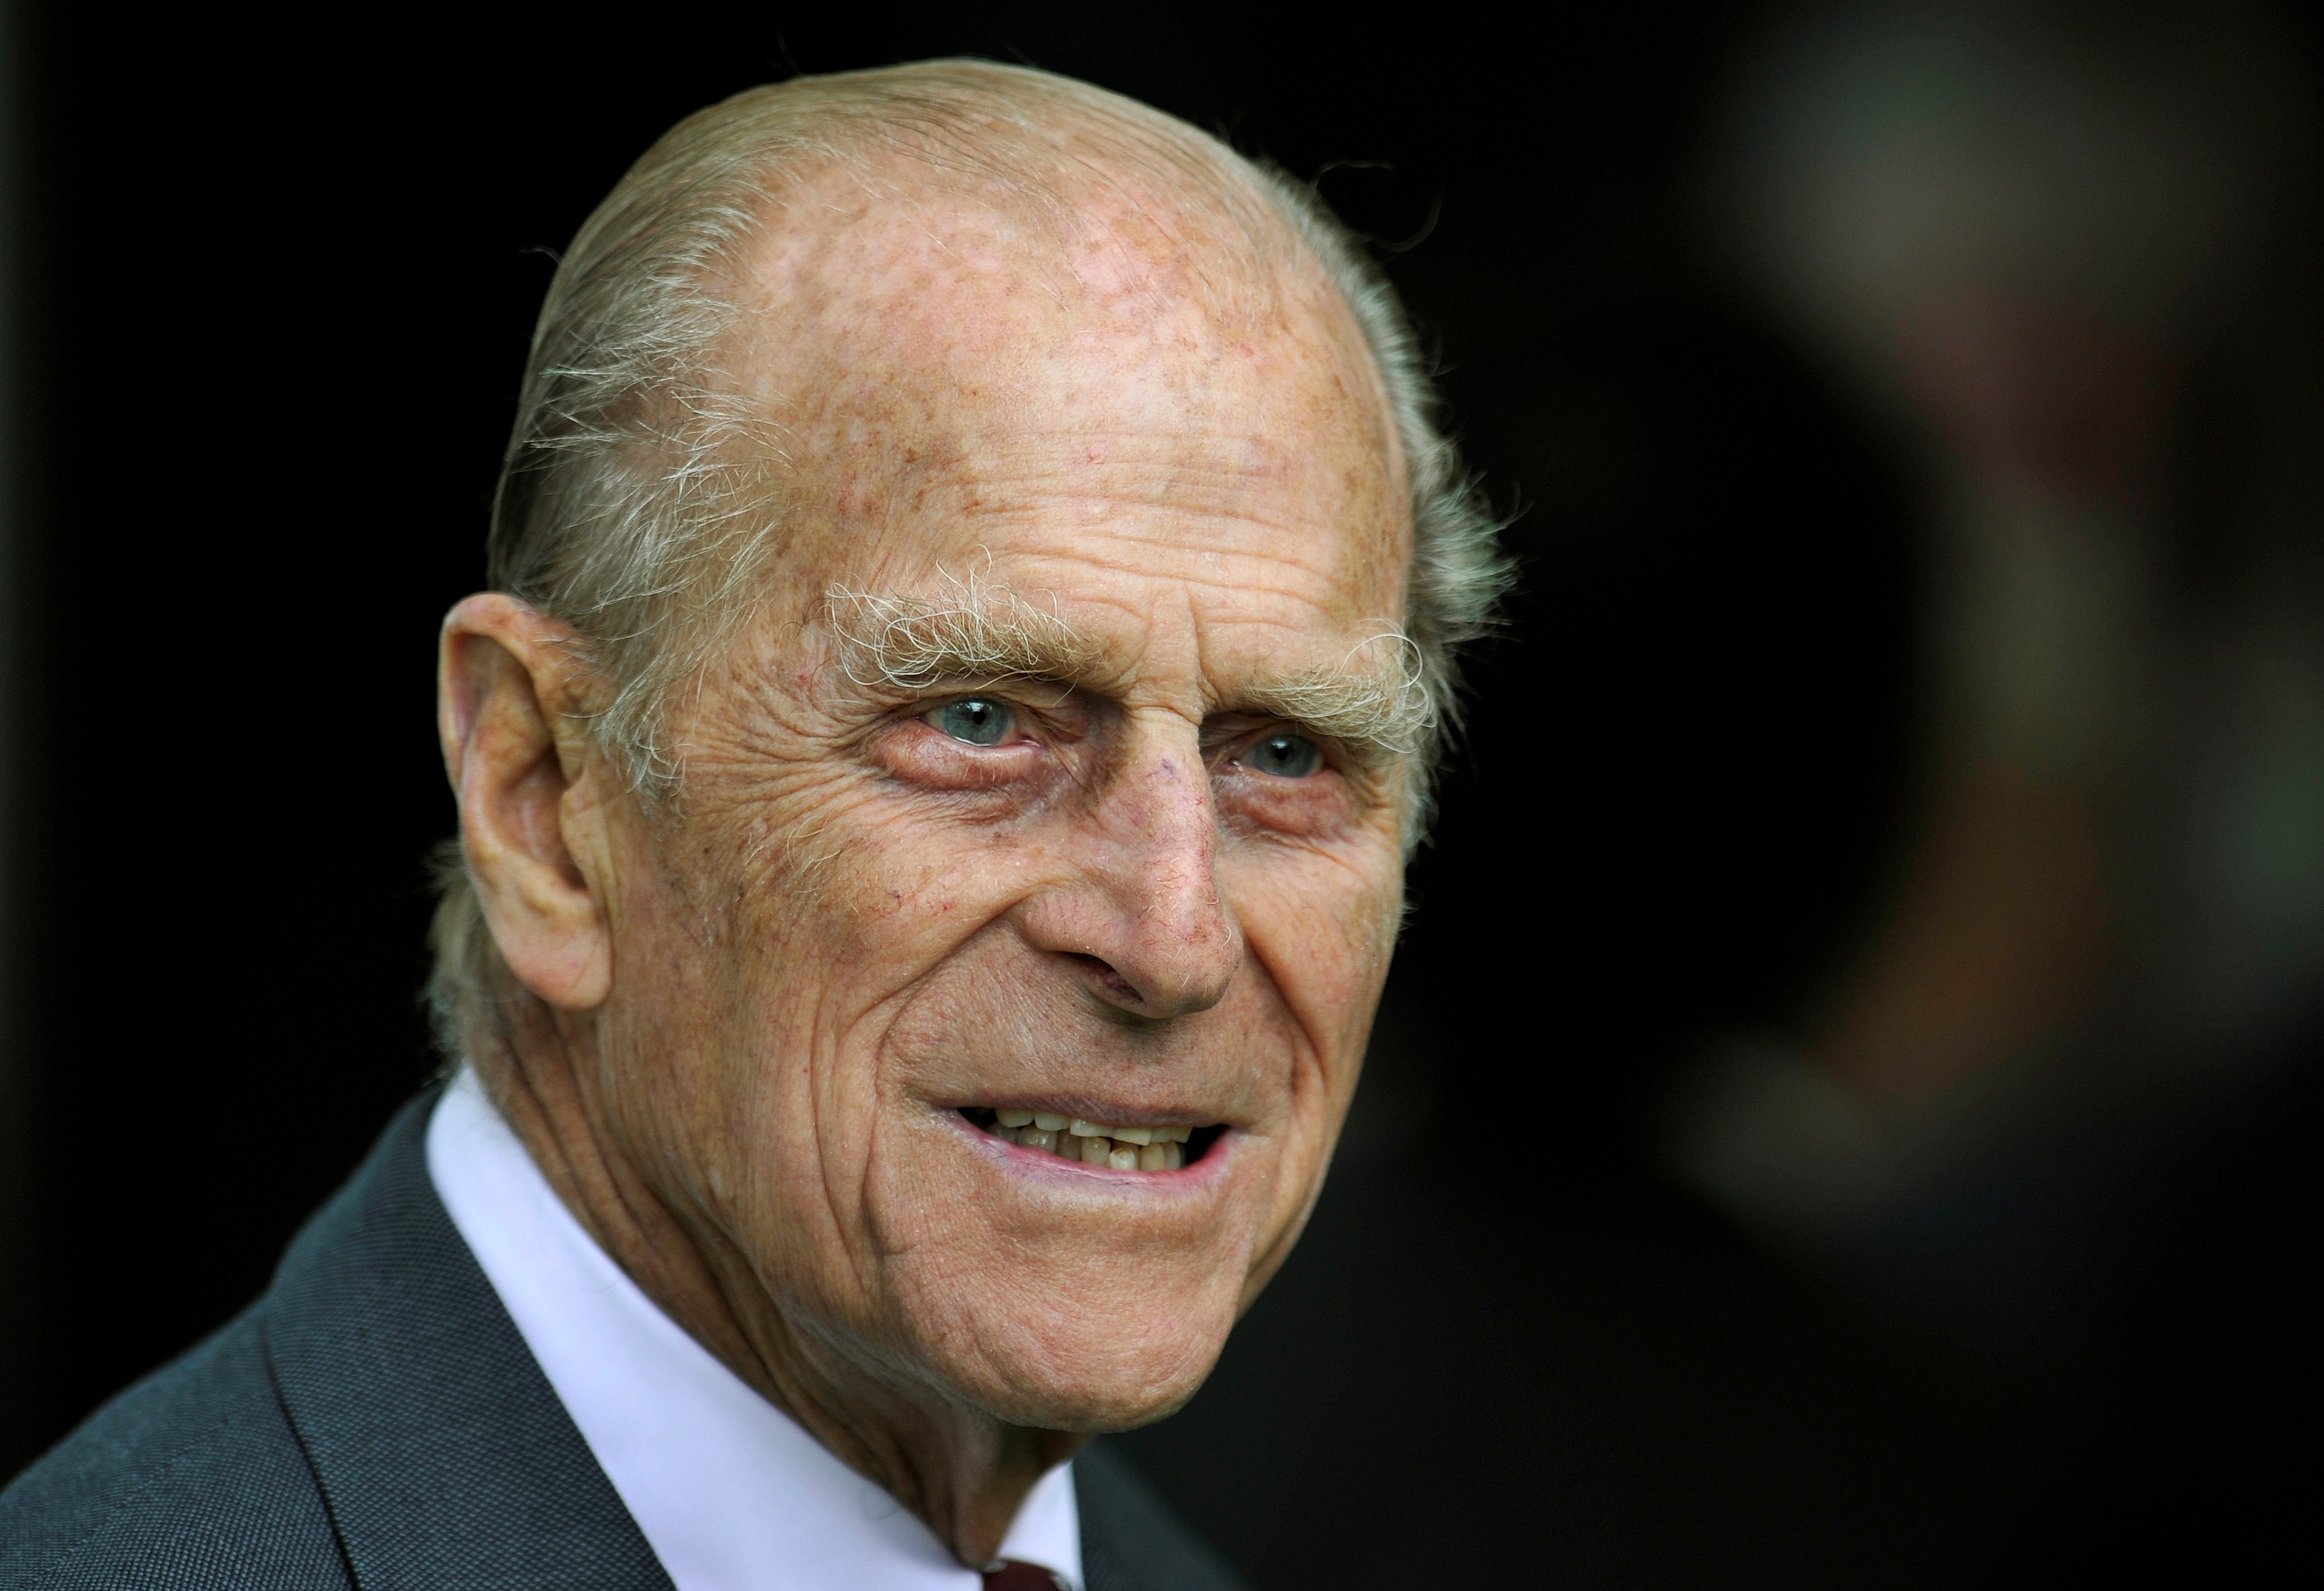 Britain's Prince Philip smiles during his visit with Queen Elizabeth to the Irish National Stud in Kildare